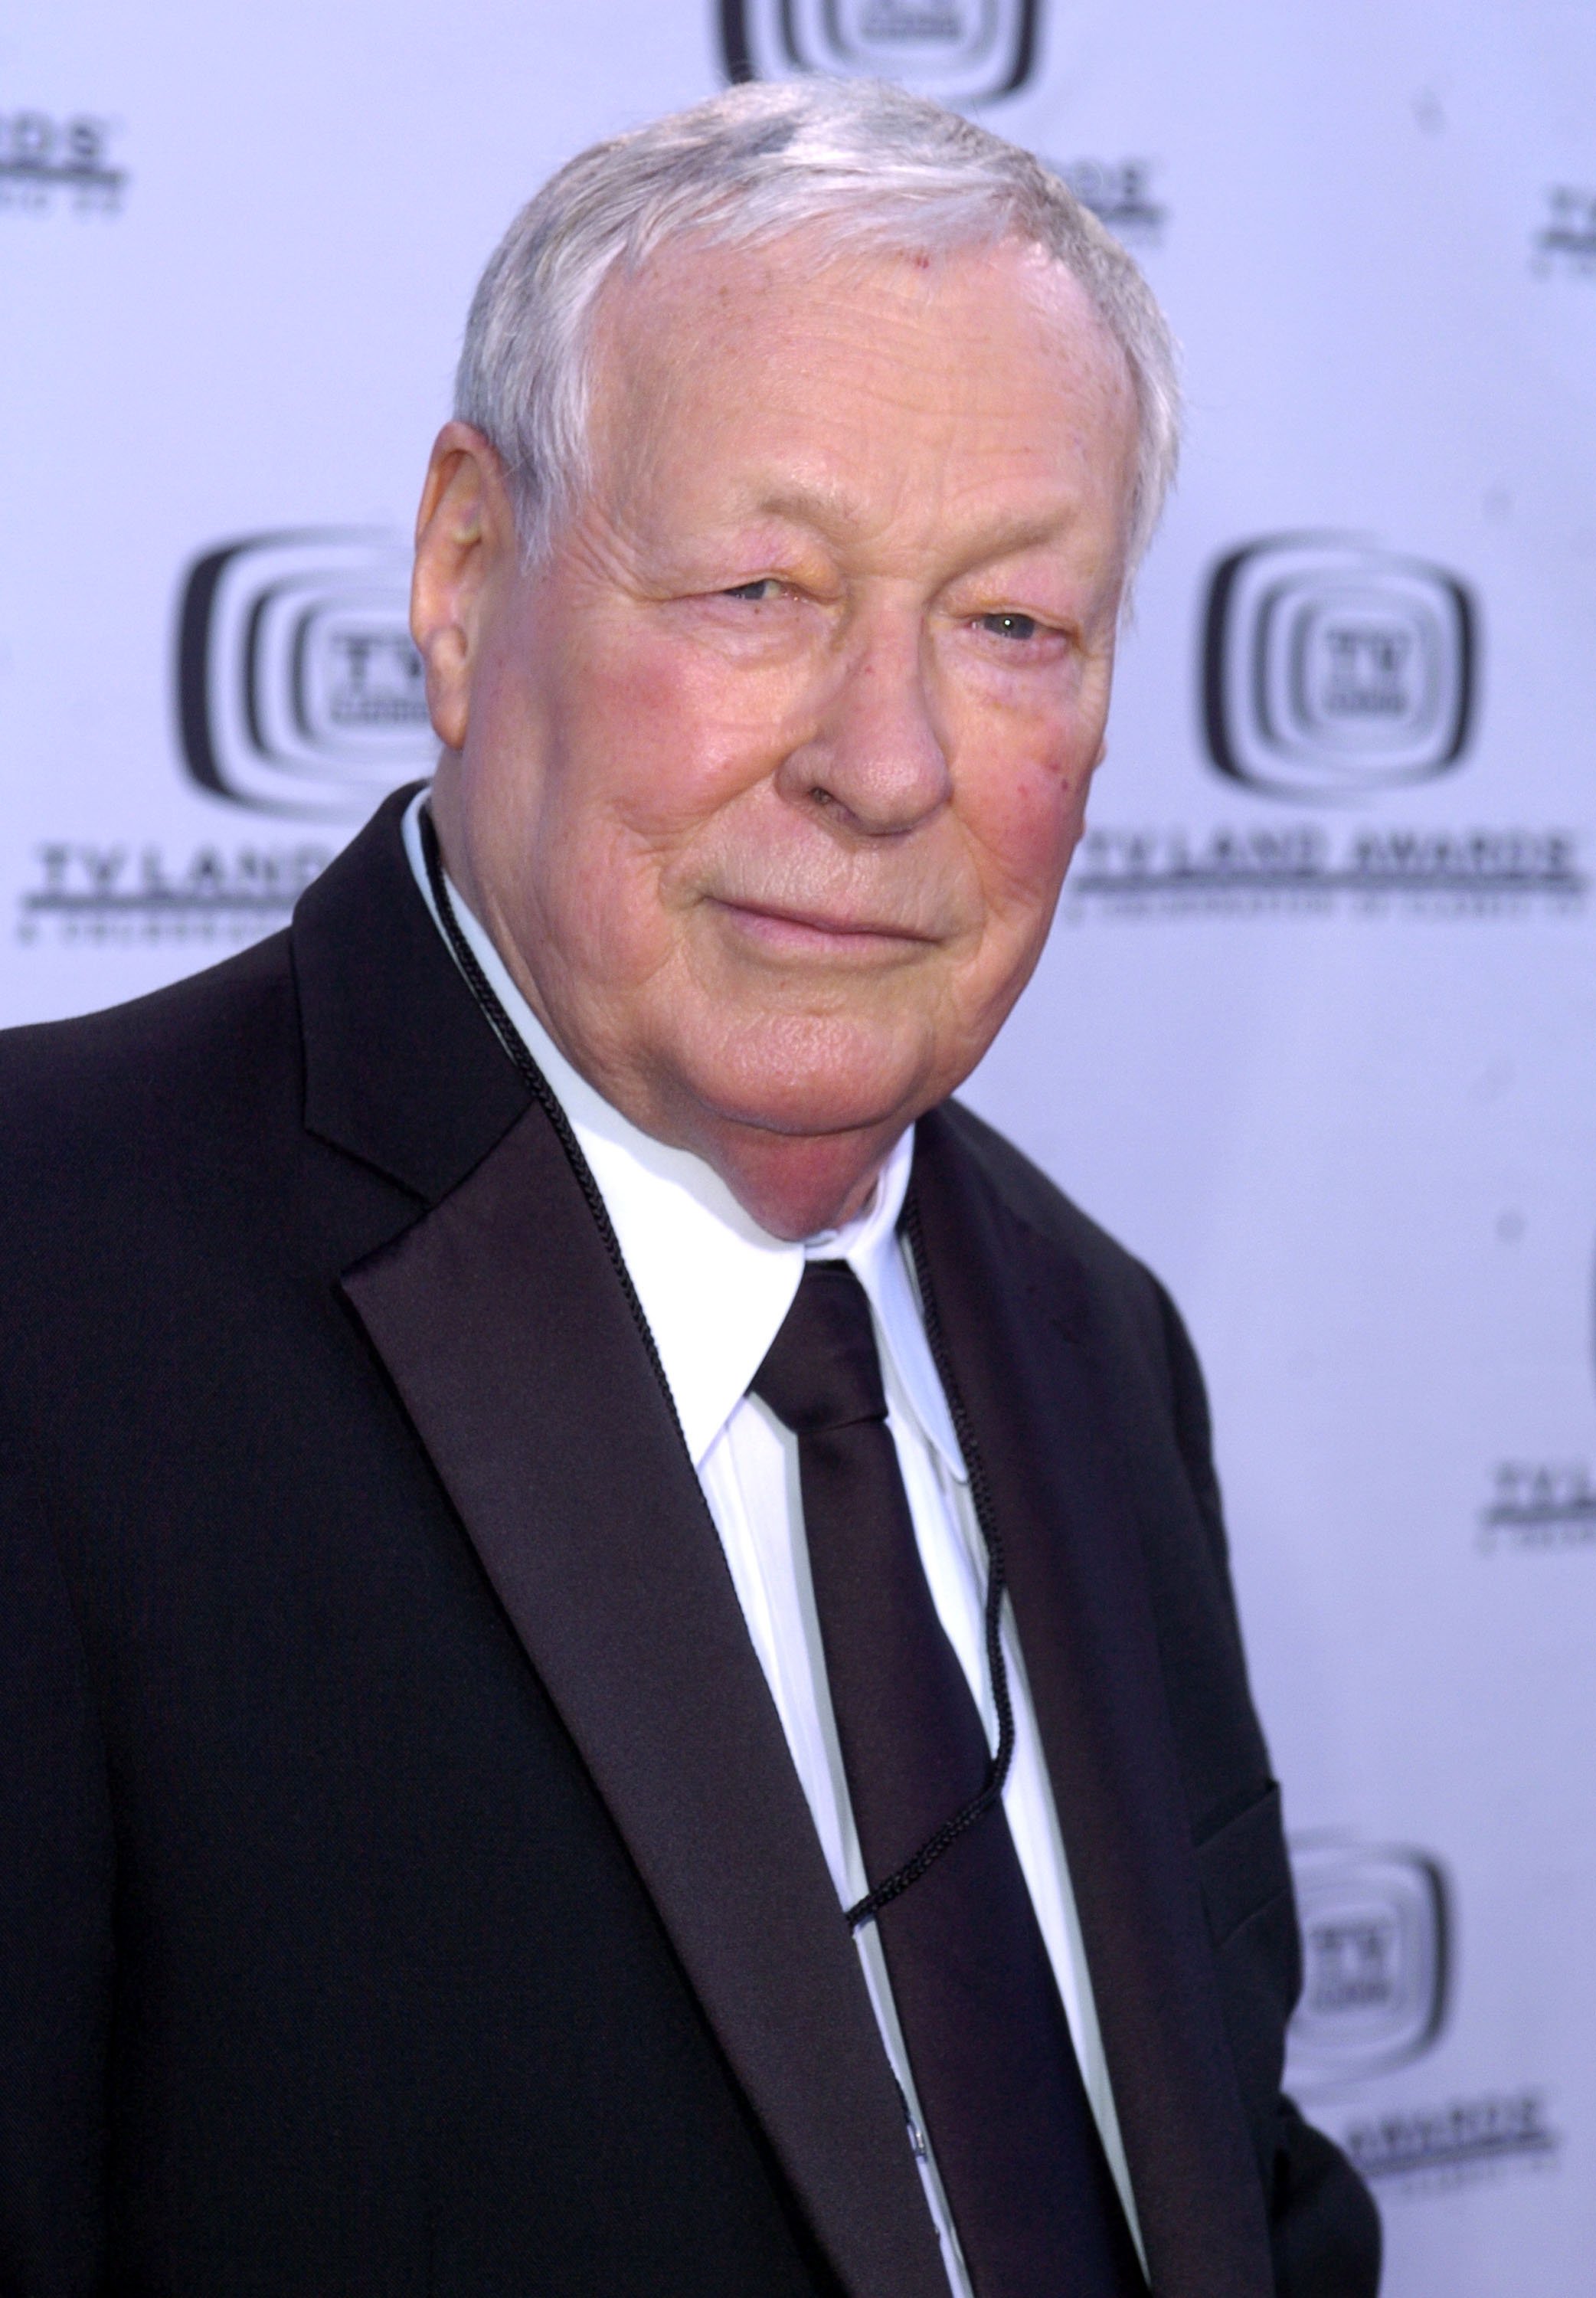 Russell Johnson during 2nd Annual TV Land Awards - Arrivals at The Hollywood Palladium in Hollywood, California, United States in 2004 | Source: Getty Images